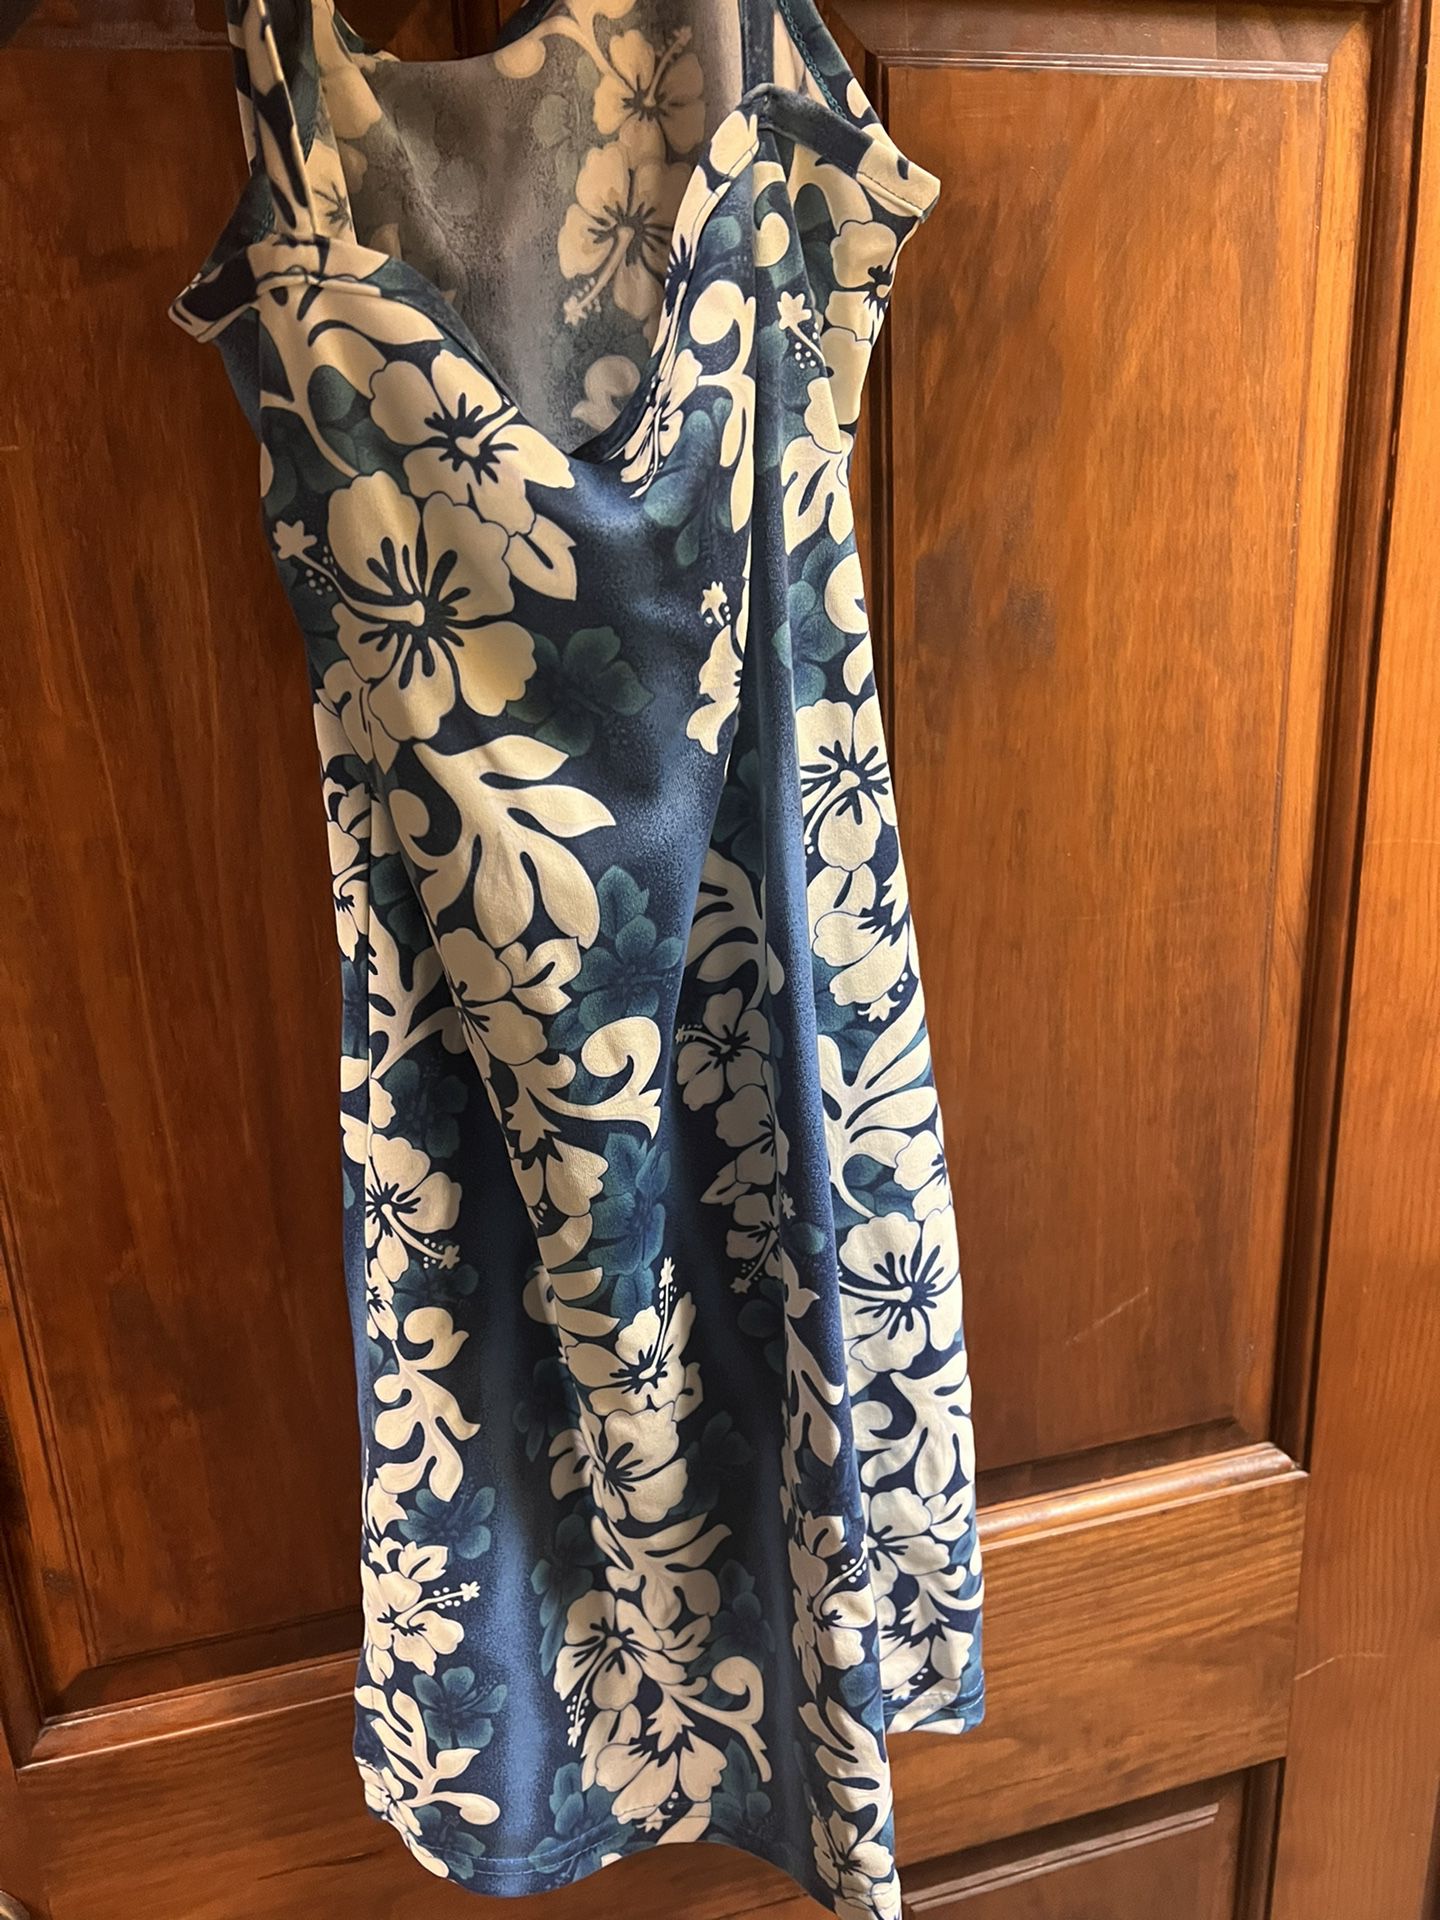 Woman’s Size Small 100% Polyester Summer Dress or Nightgown. East Dundee. Many More Items to Look at.